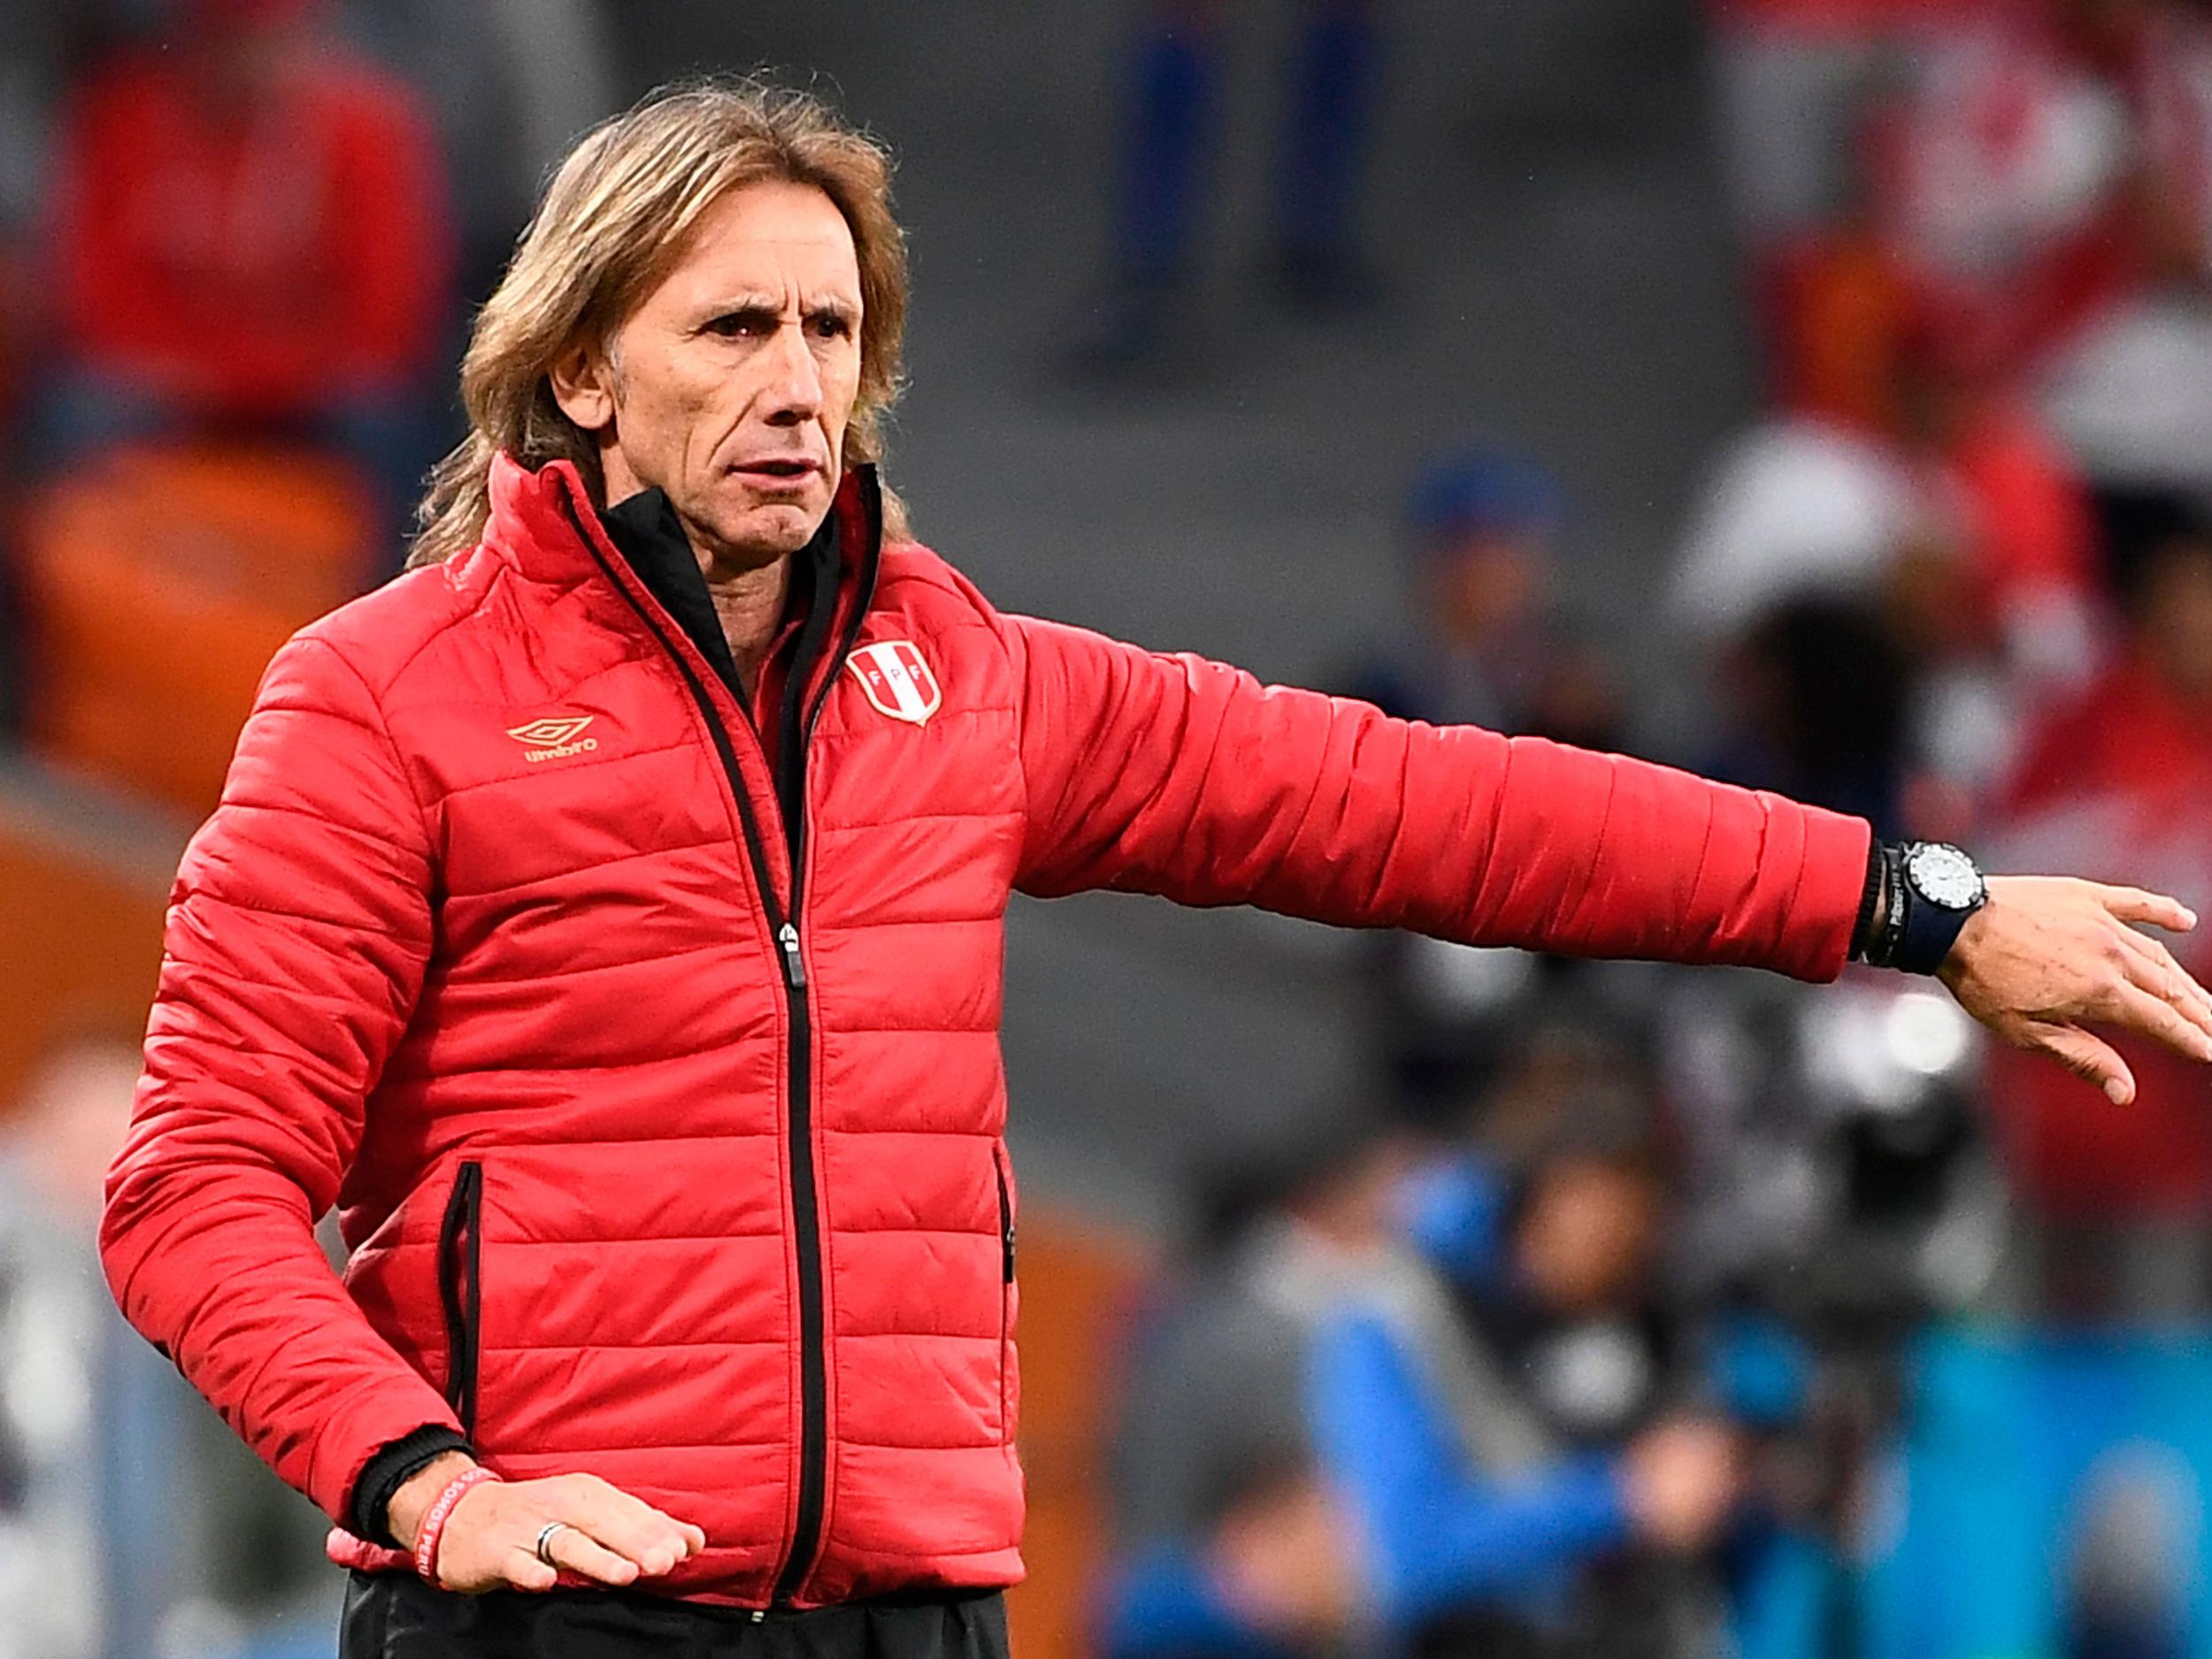 Ricardo Gareca thanked Peru's travelling fans for their support in Russia